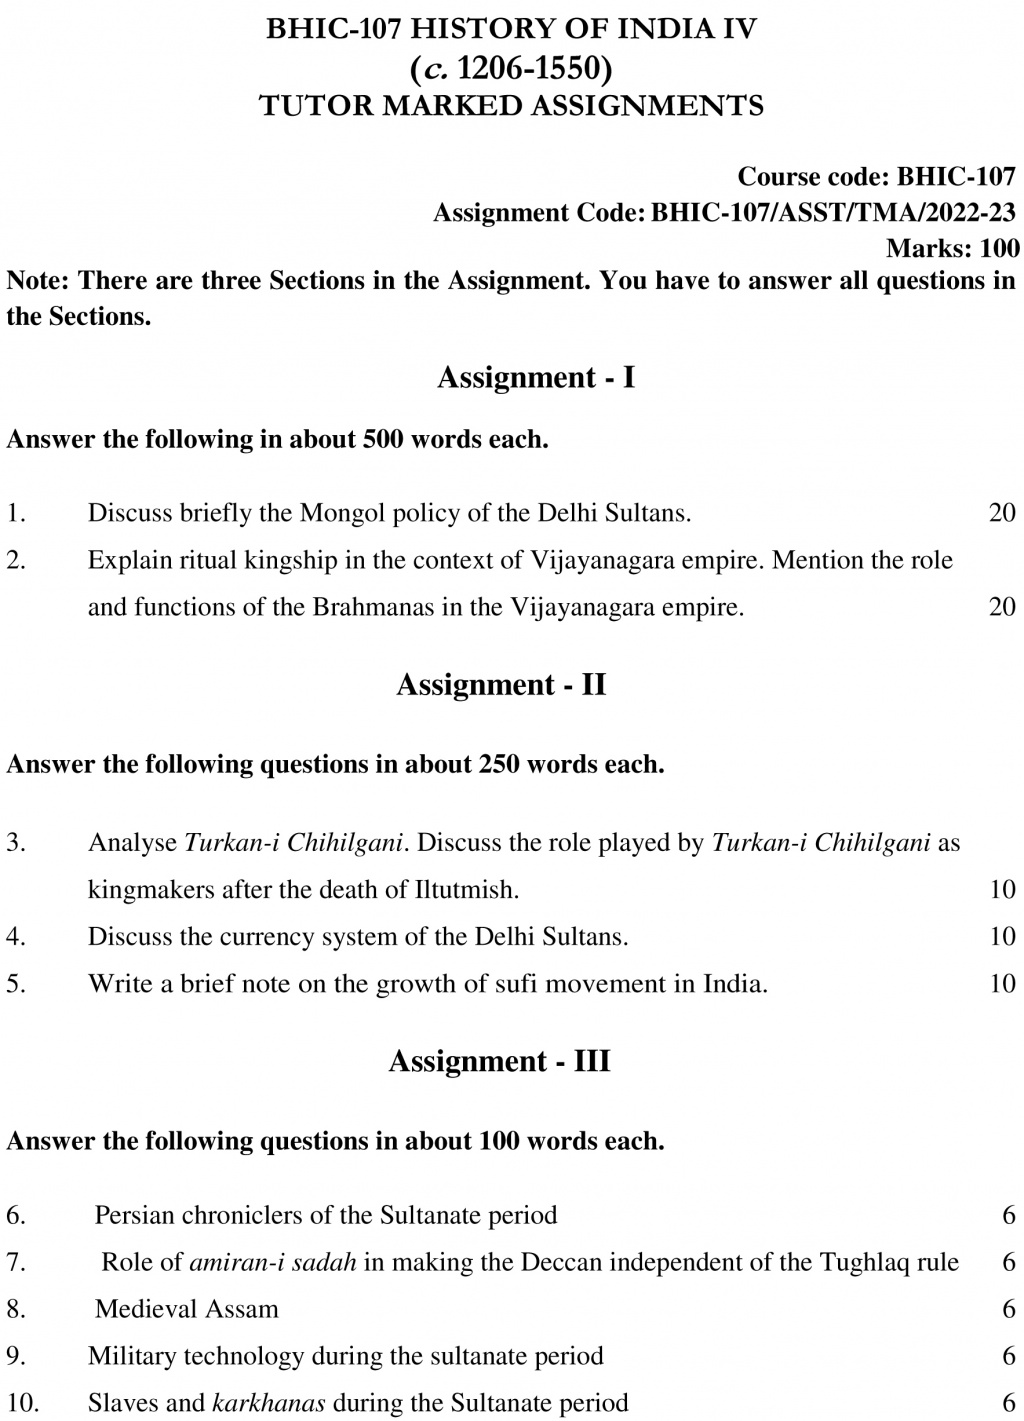 IGNOU BHIC-107 - History of India – IV (c. 1206 – 1550) Latest Solved Assignment-July 2022 – January 2023